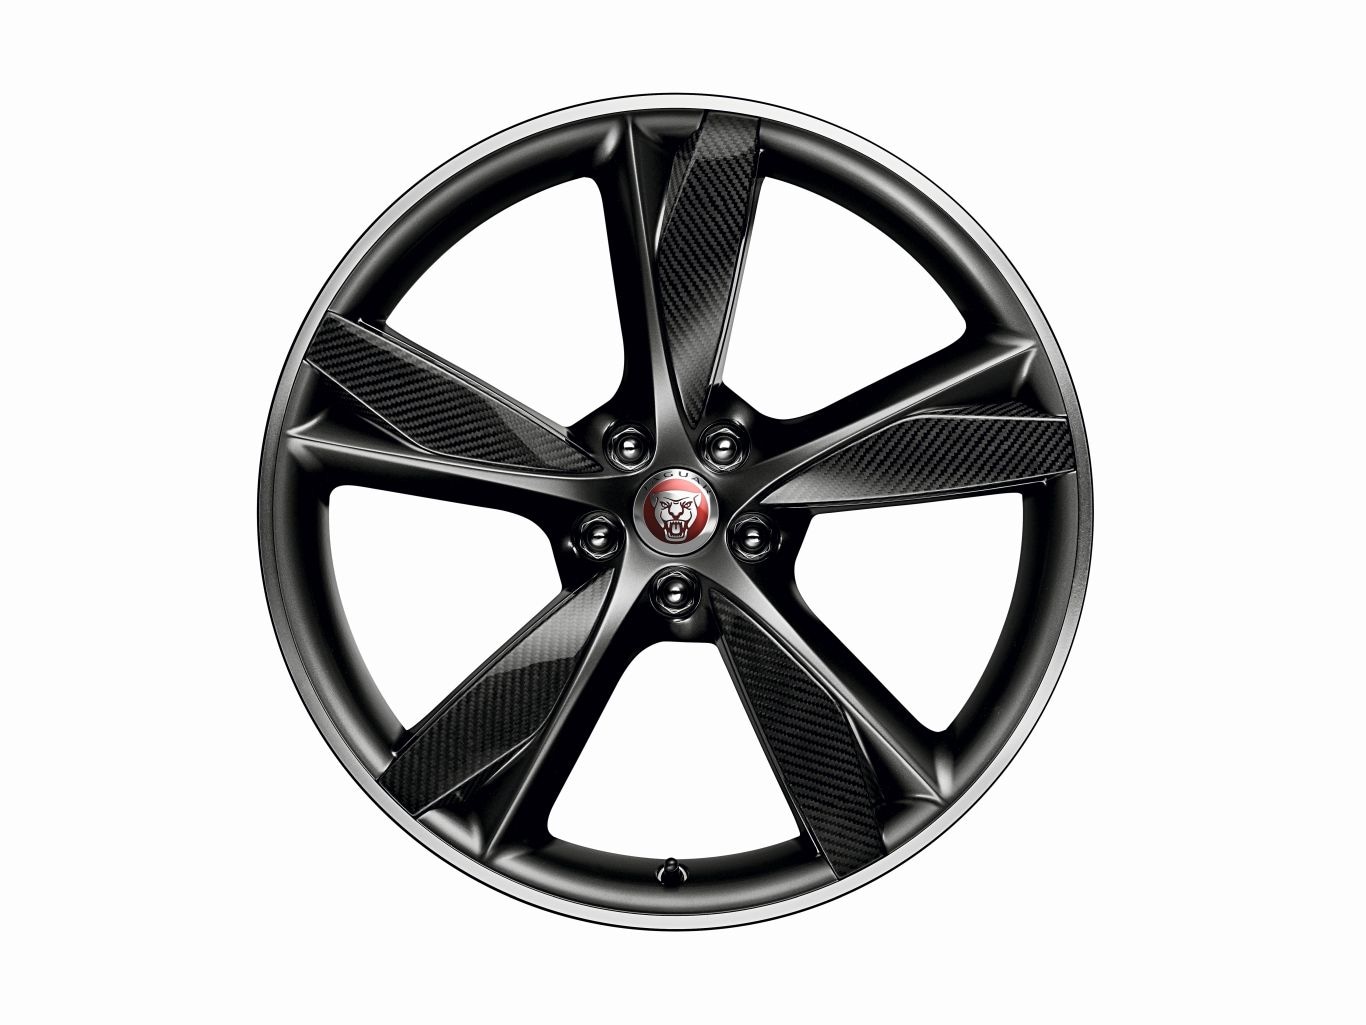 20" Forged, Style 5042, Diamond Turned with Satin Dark Grey contrast and Carbon Fiber inserts, front image